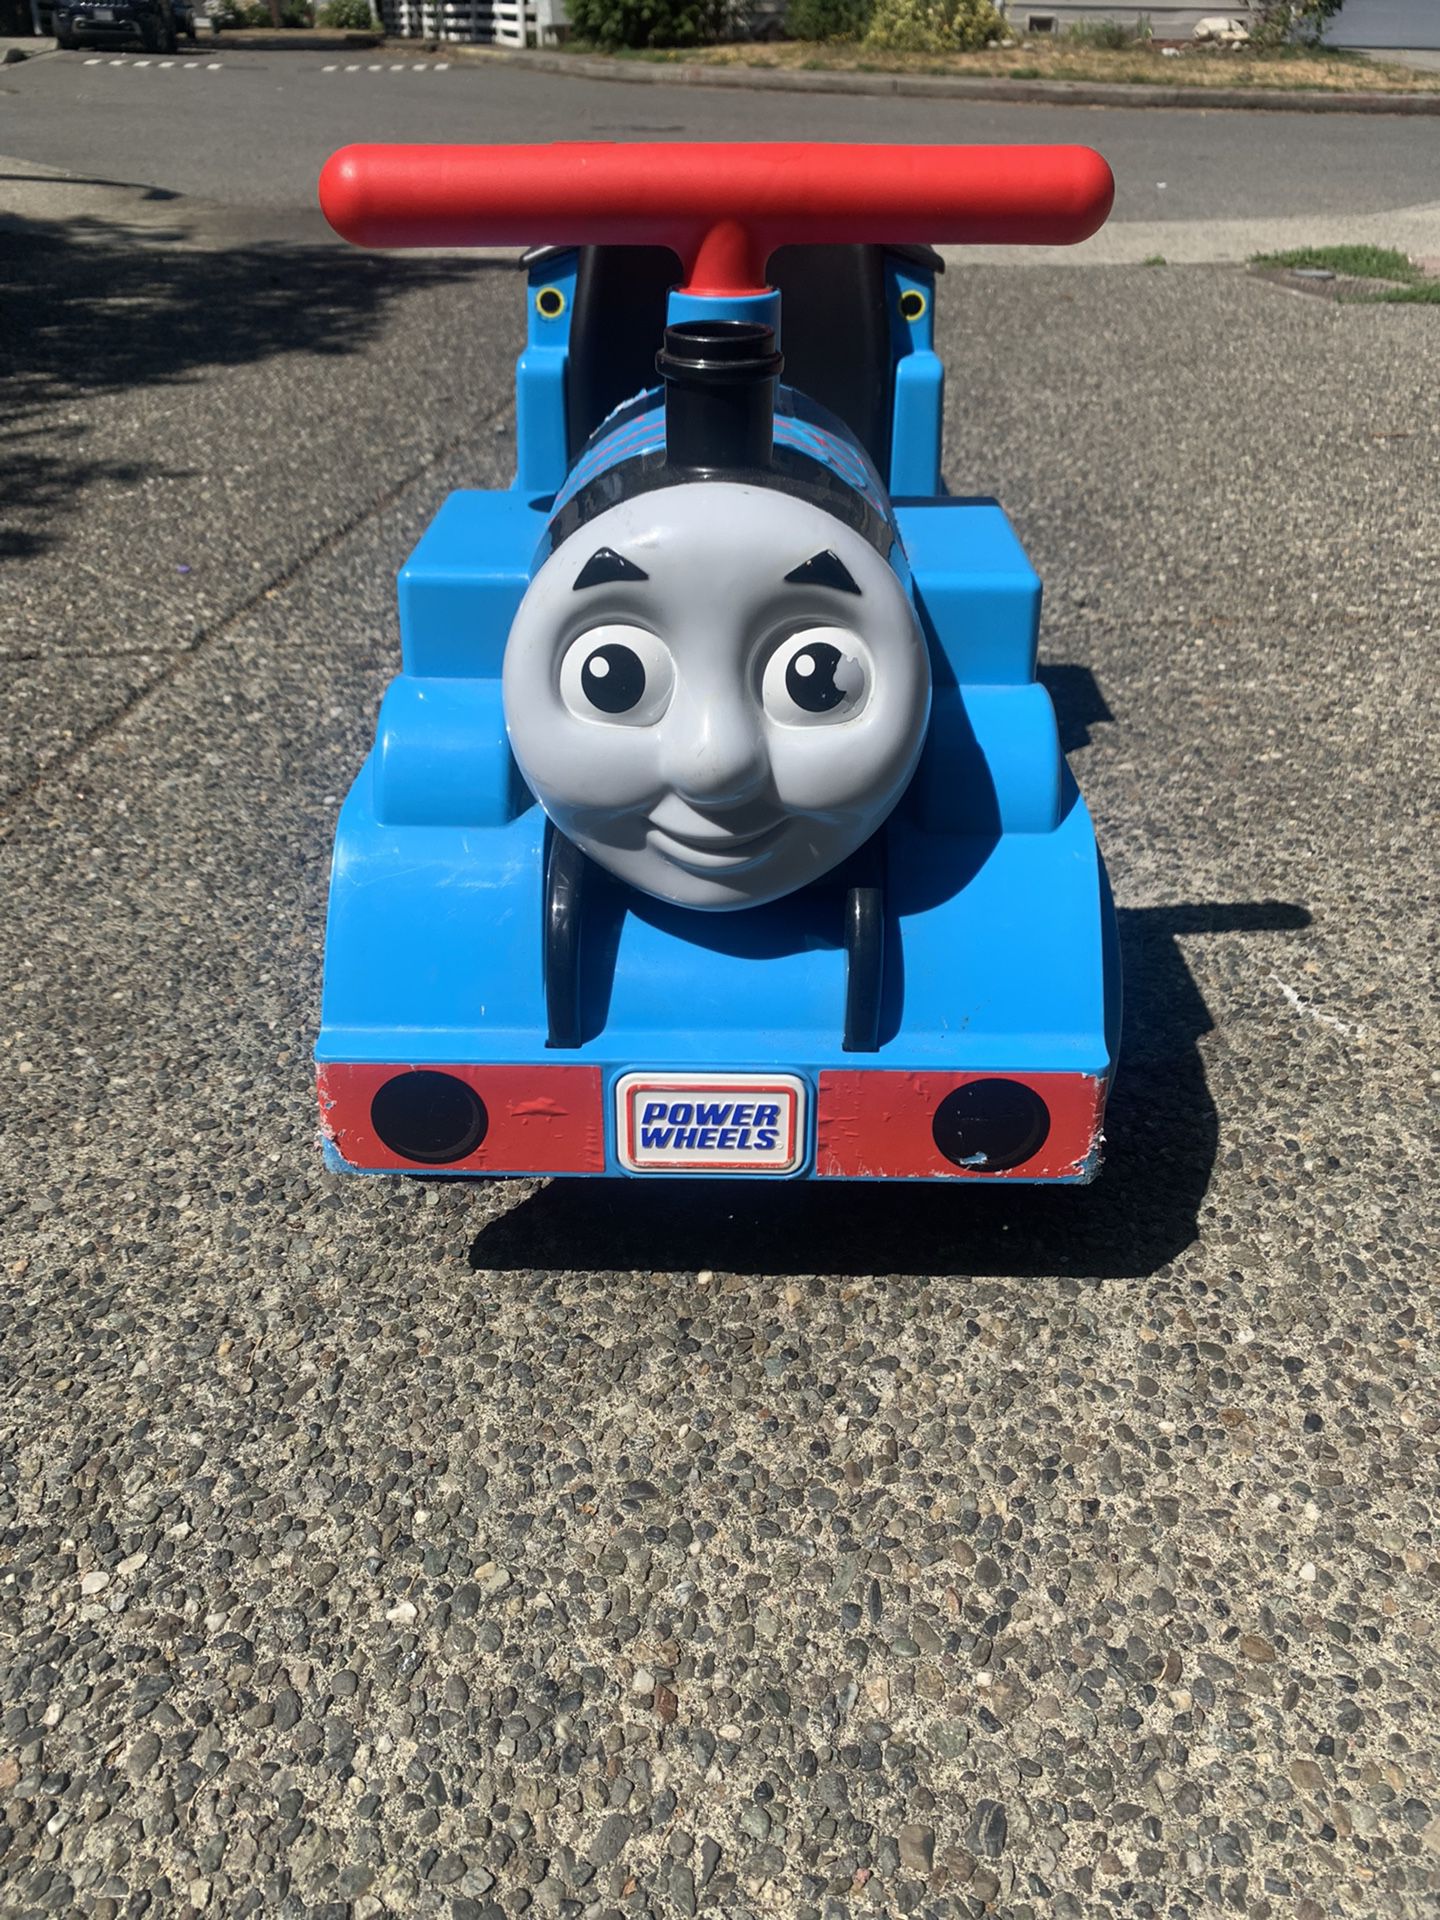 Thomas Power Wheel With Tracks And 2 Charger Cords